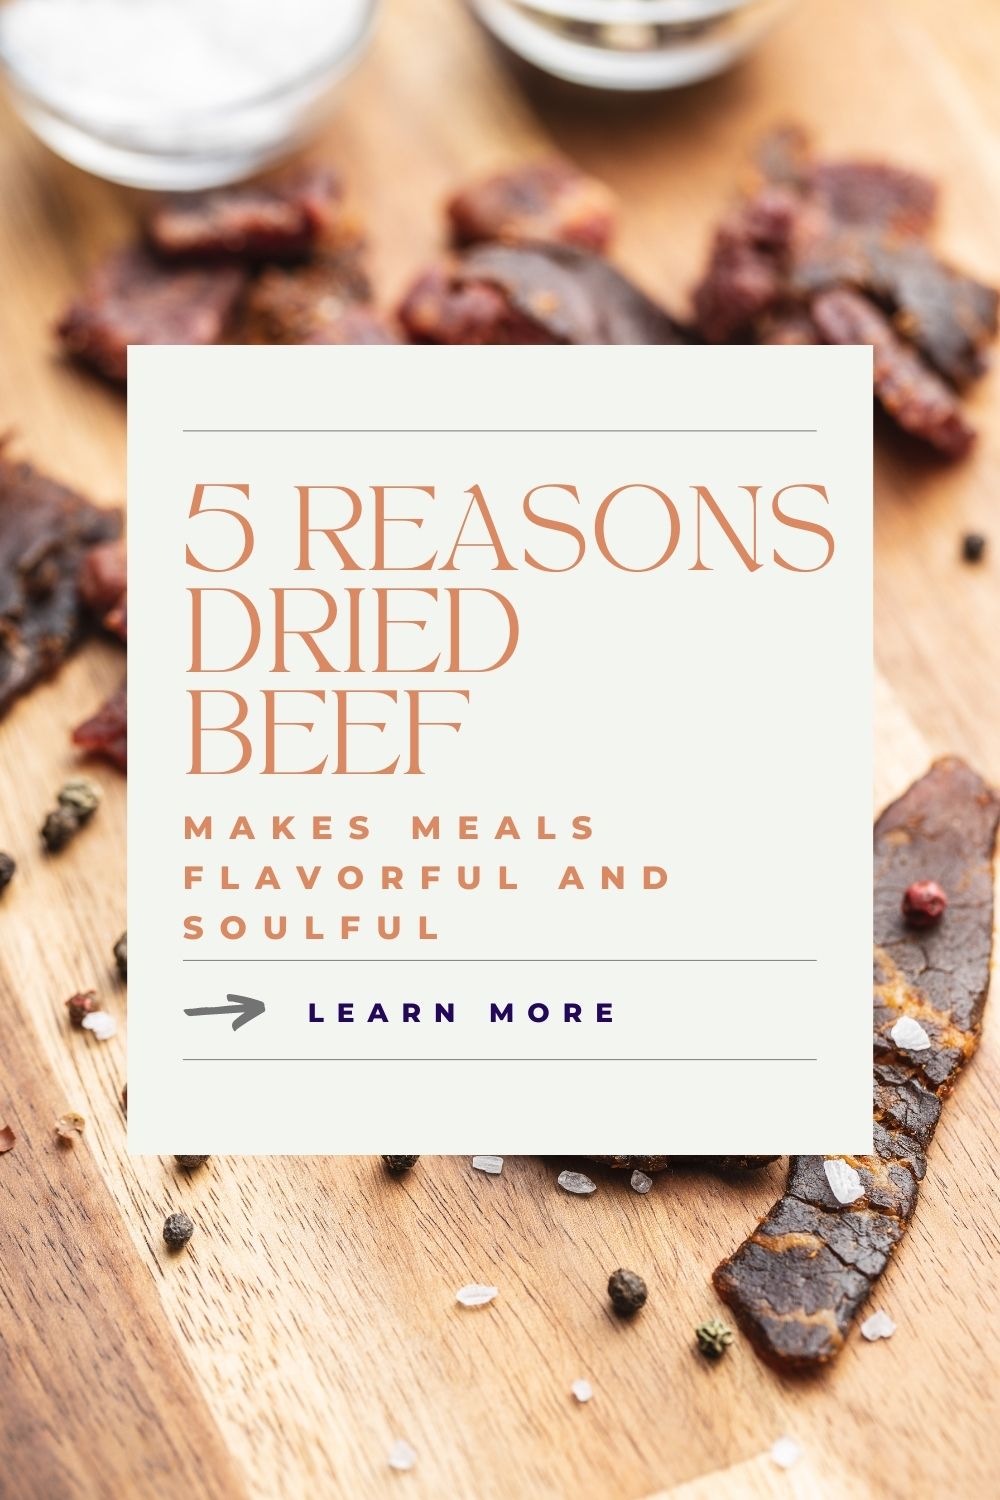 5 Reasons How Dried Beef Can Make Meals Flavorful and Soulful